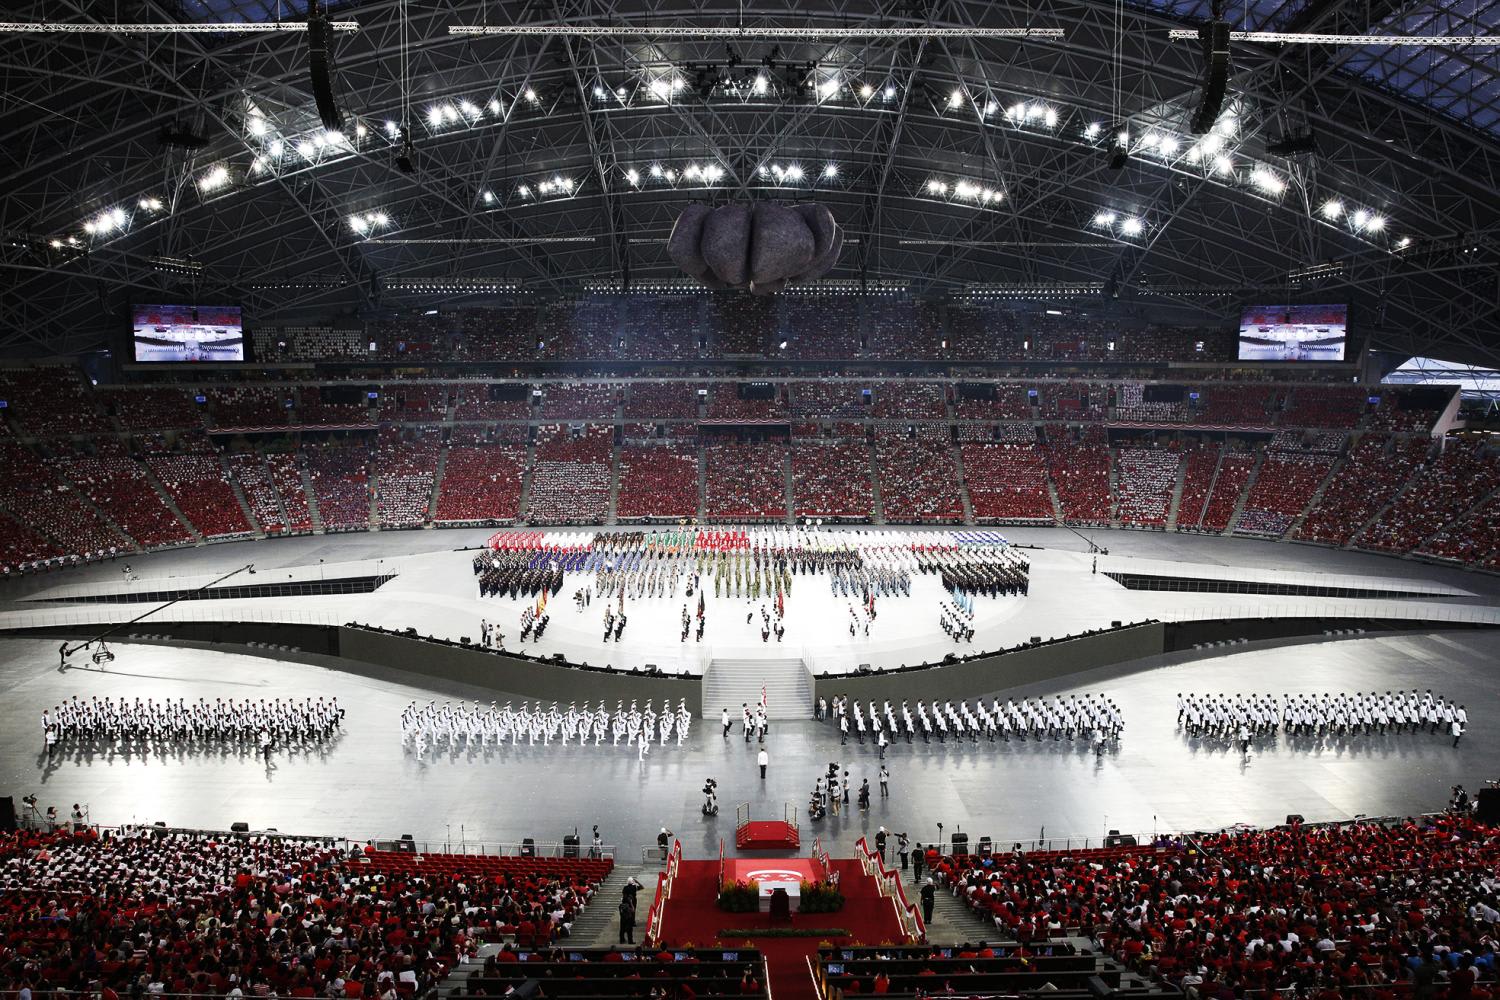 The National Day Parade in 2016 when it was held at the National Stadium within the grounds of the Singapore Sports Hub.